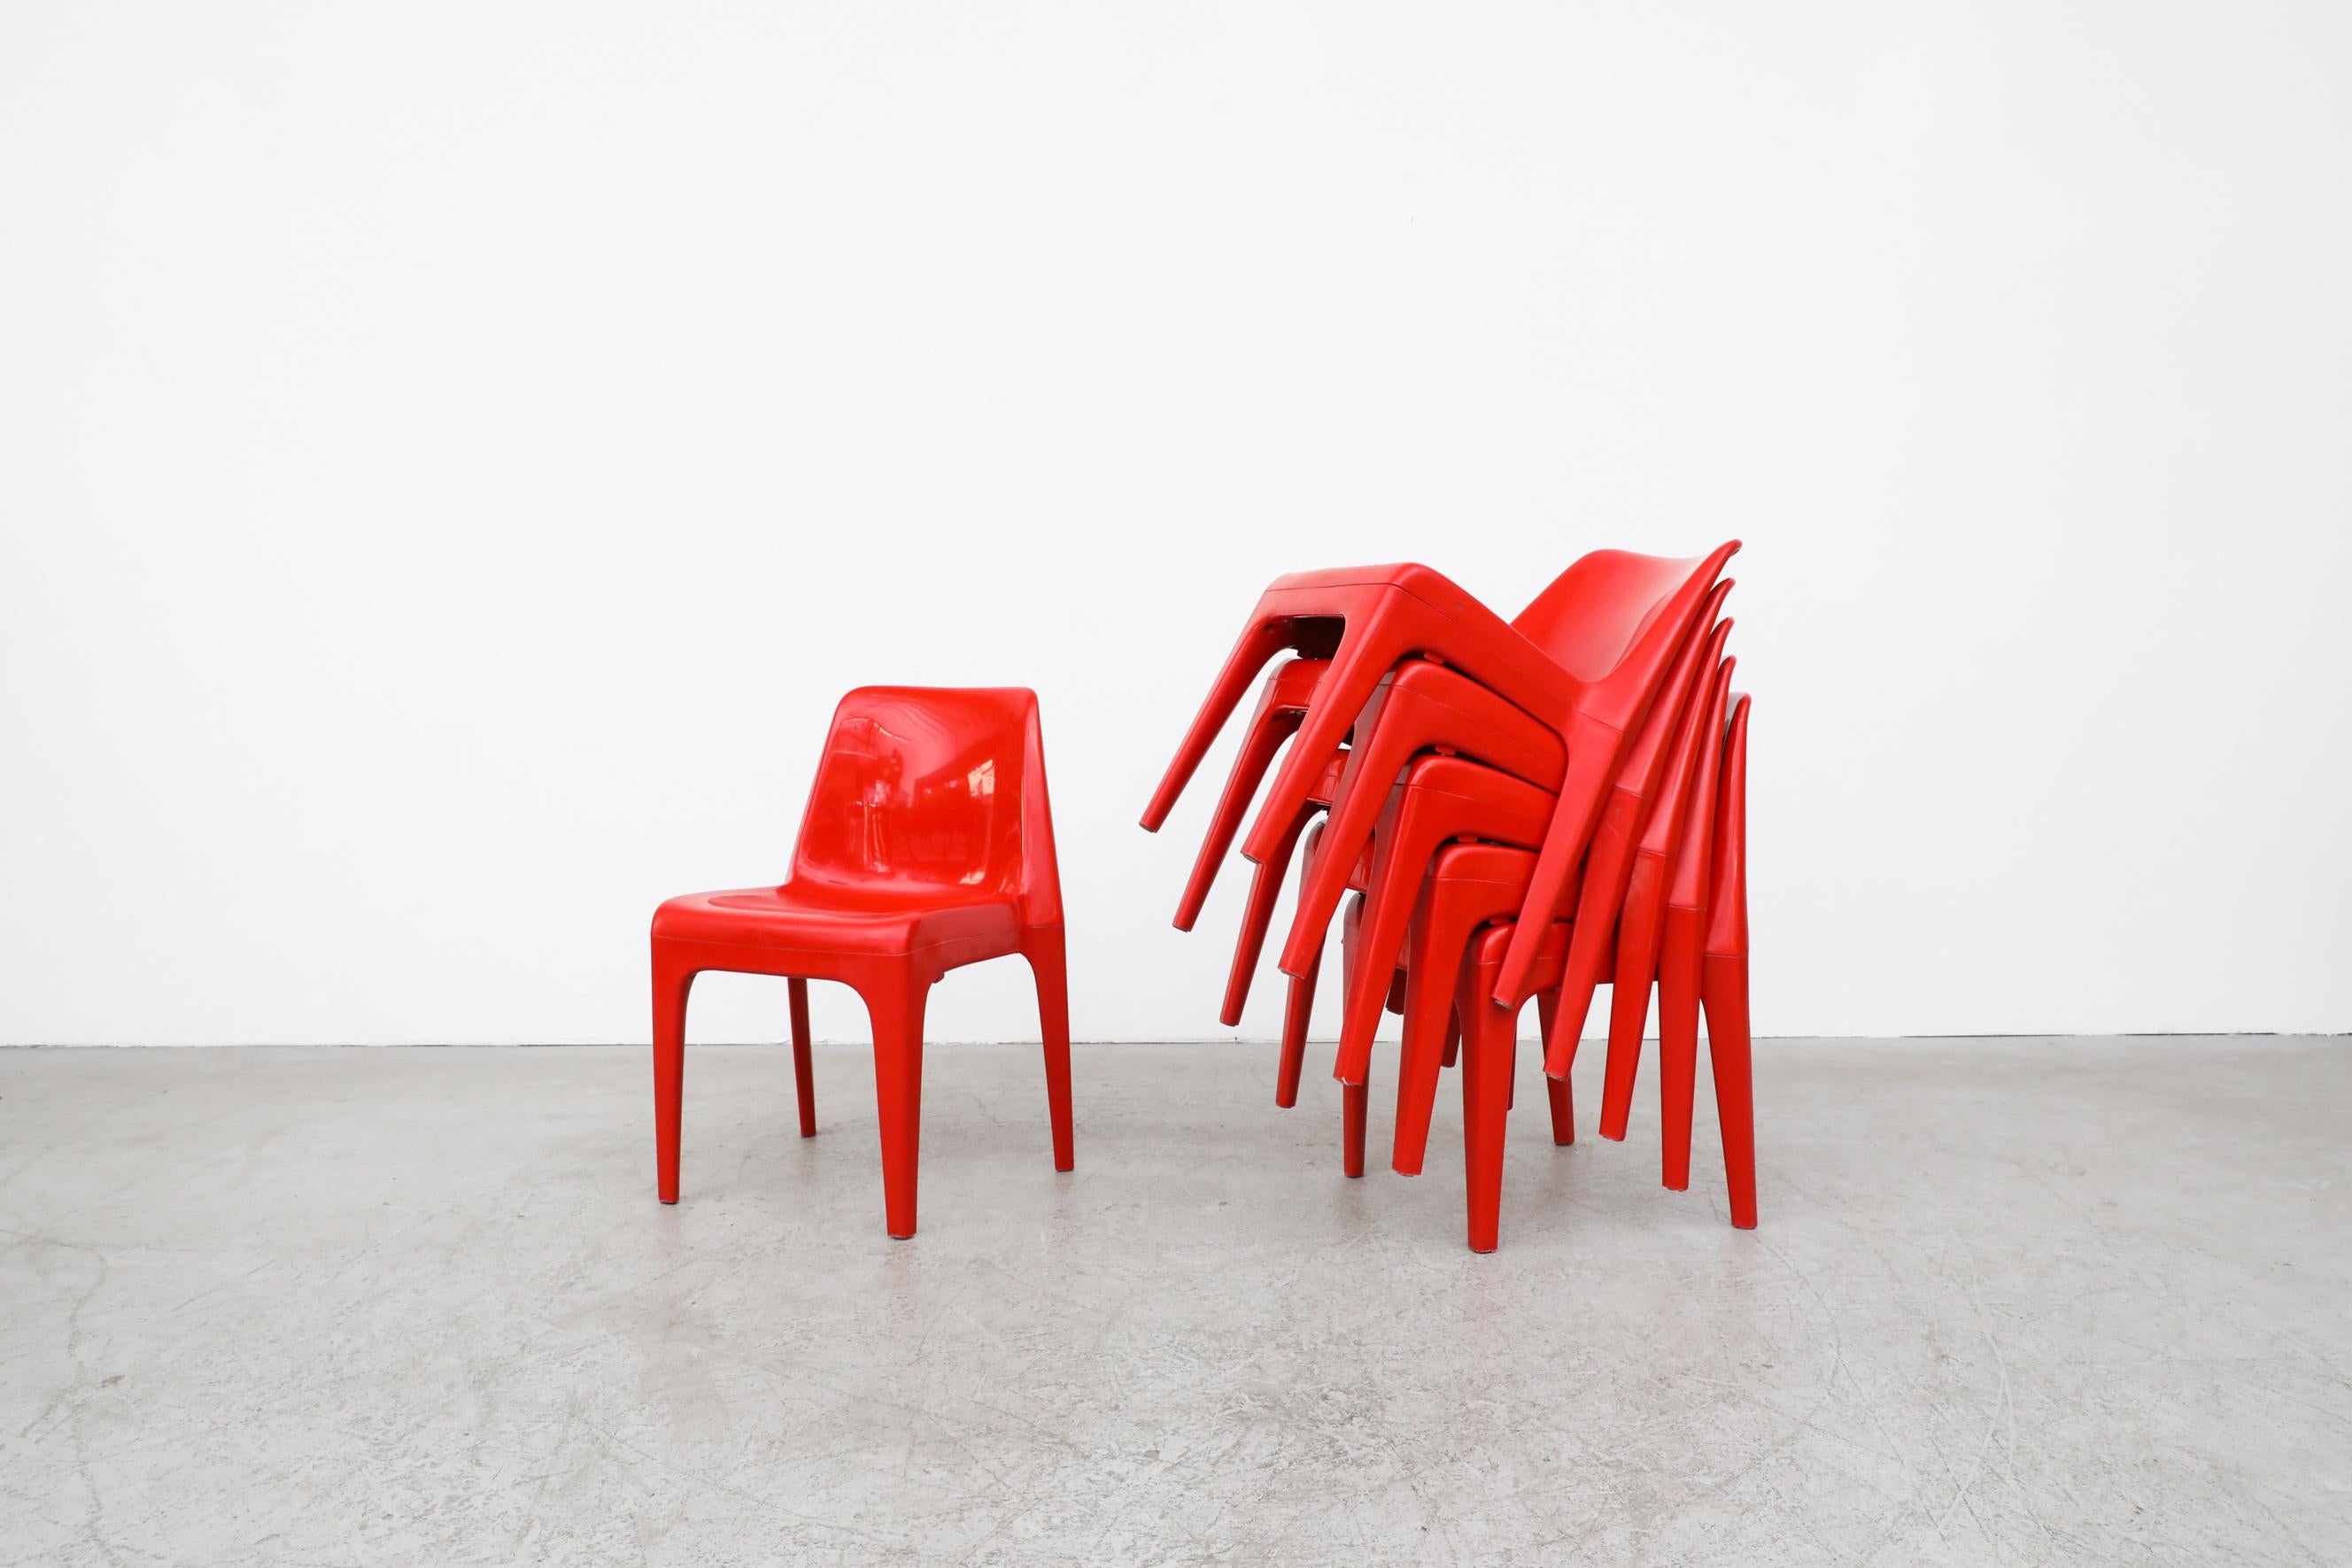 Fire engine red acrylic stacking chairs in the style of Kartell 4850 by Castiglioni, made and stamped by Schröder & Henzelmann. They offer a sleek and colorful addition to any room or patio. In original condition with a few minor scratches and no